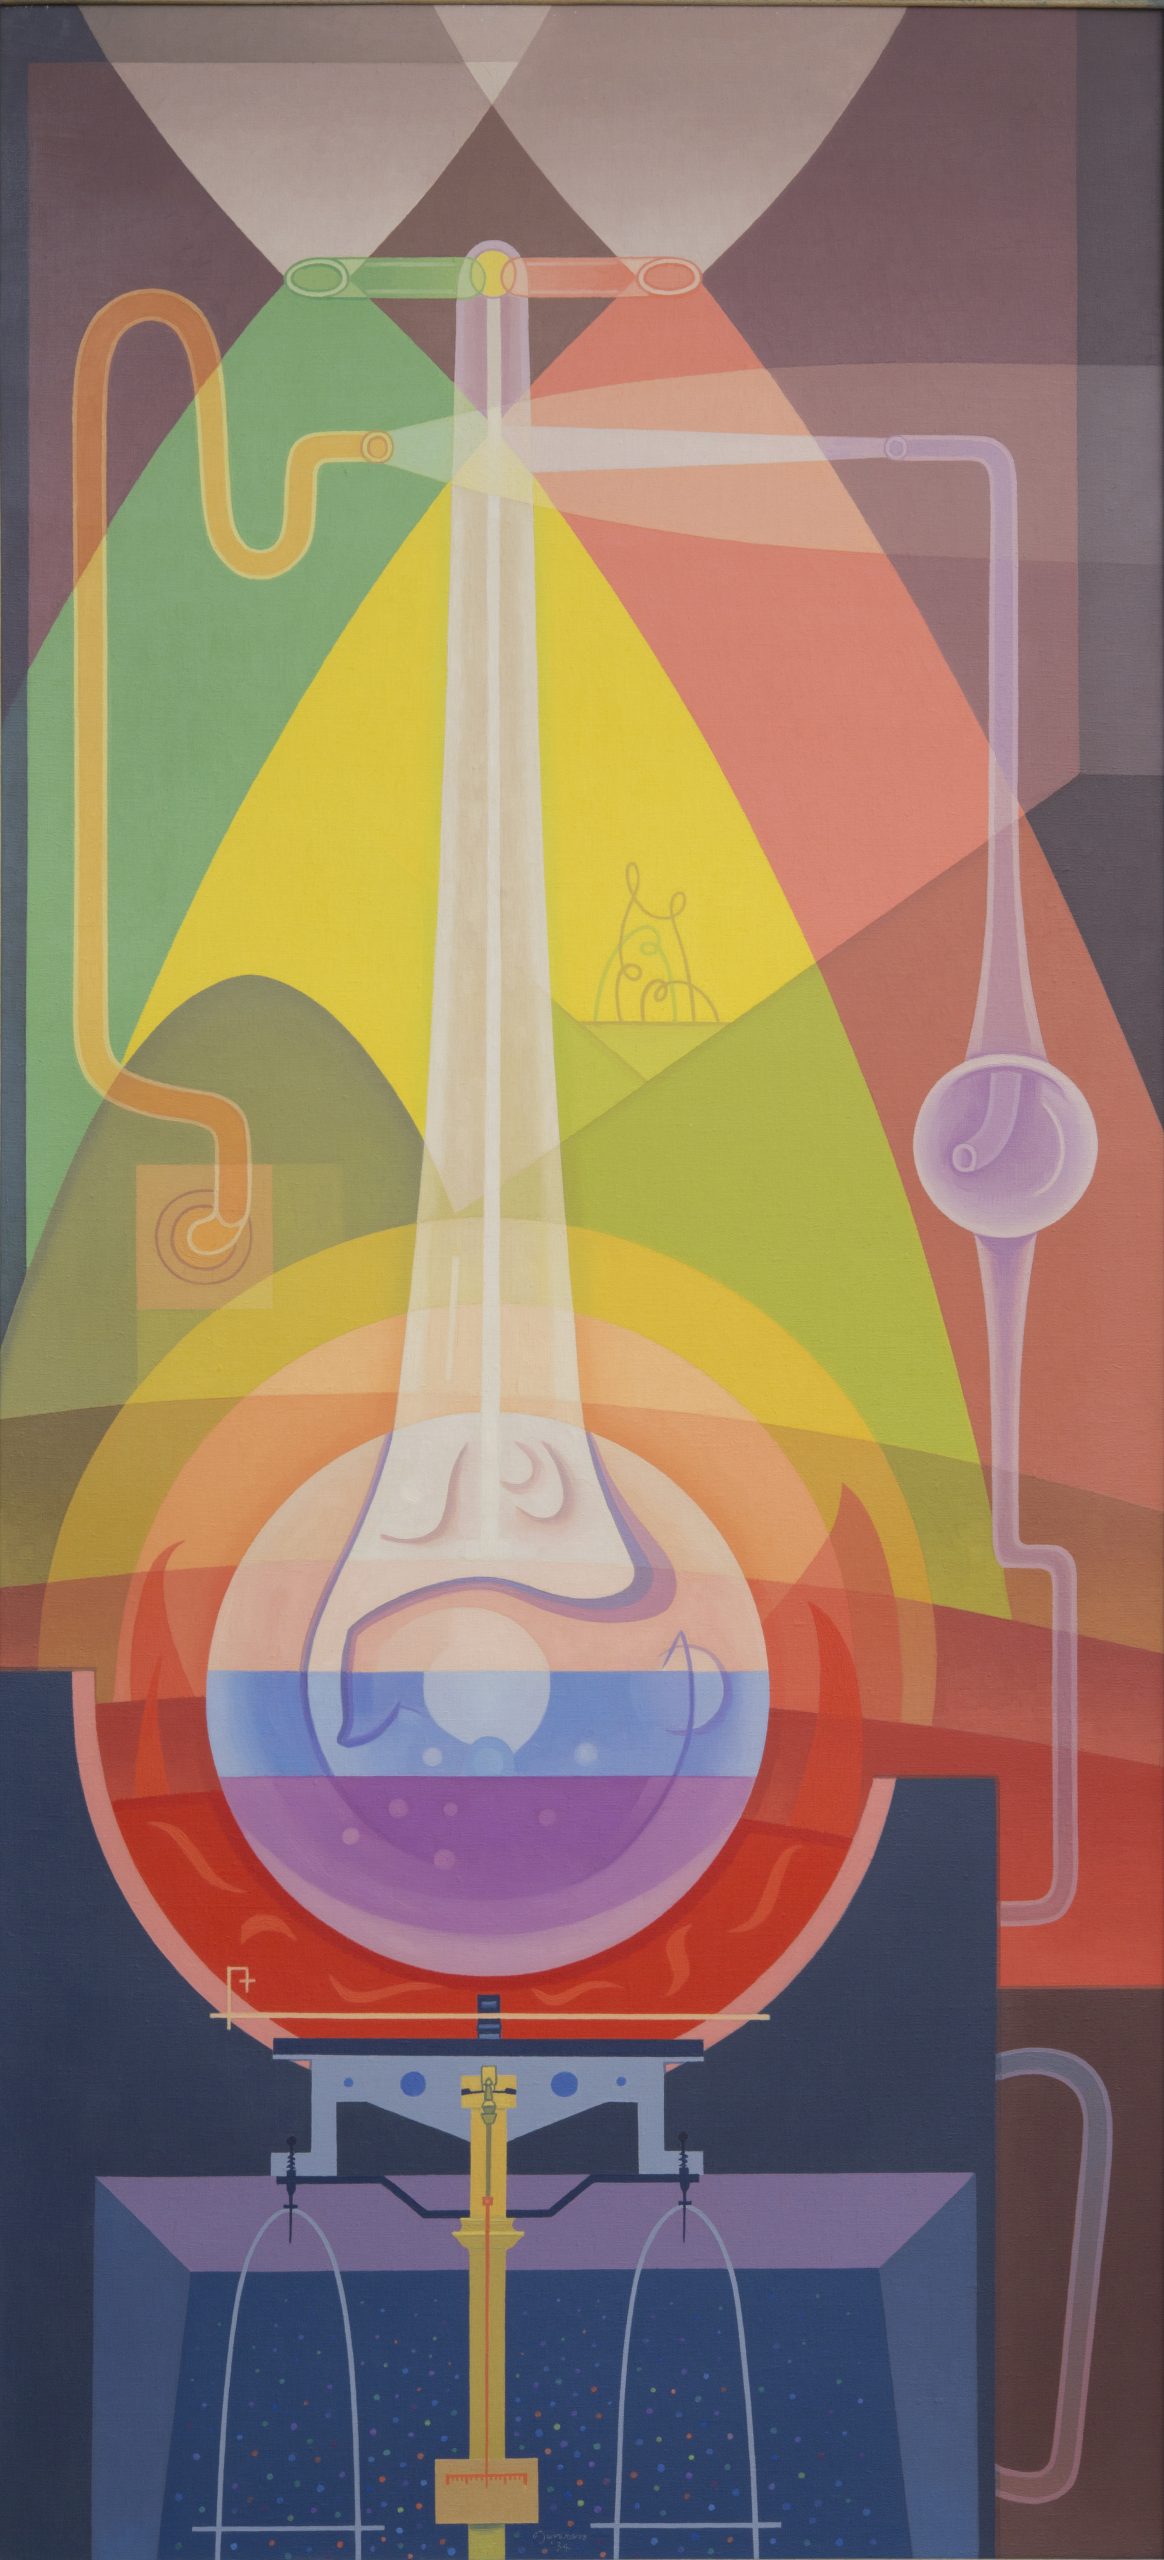 Chemistry from the series The Cycles of Science, 1934, Oil on canvas, Acquired through the Works Progress Administration (WPA) of the Federal Government, Raymond Jonson Collection